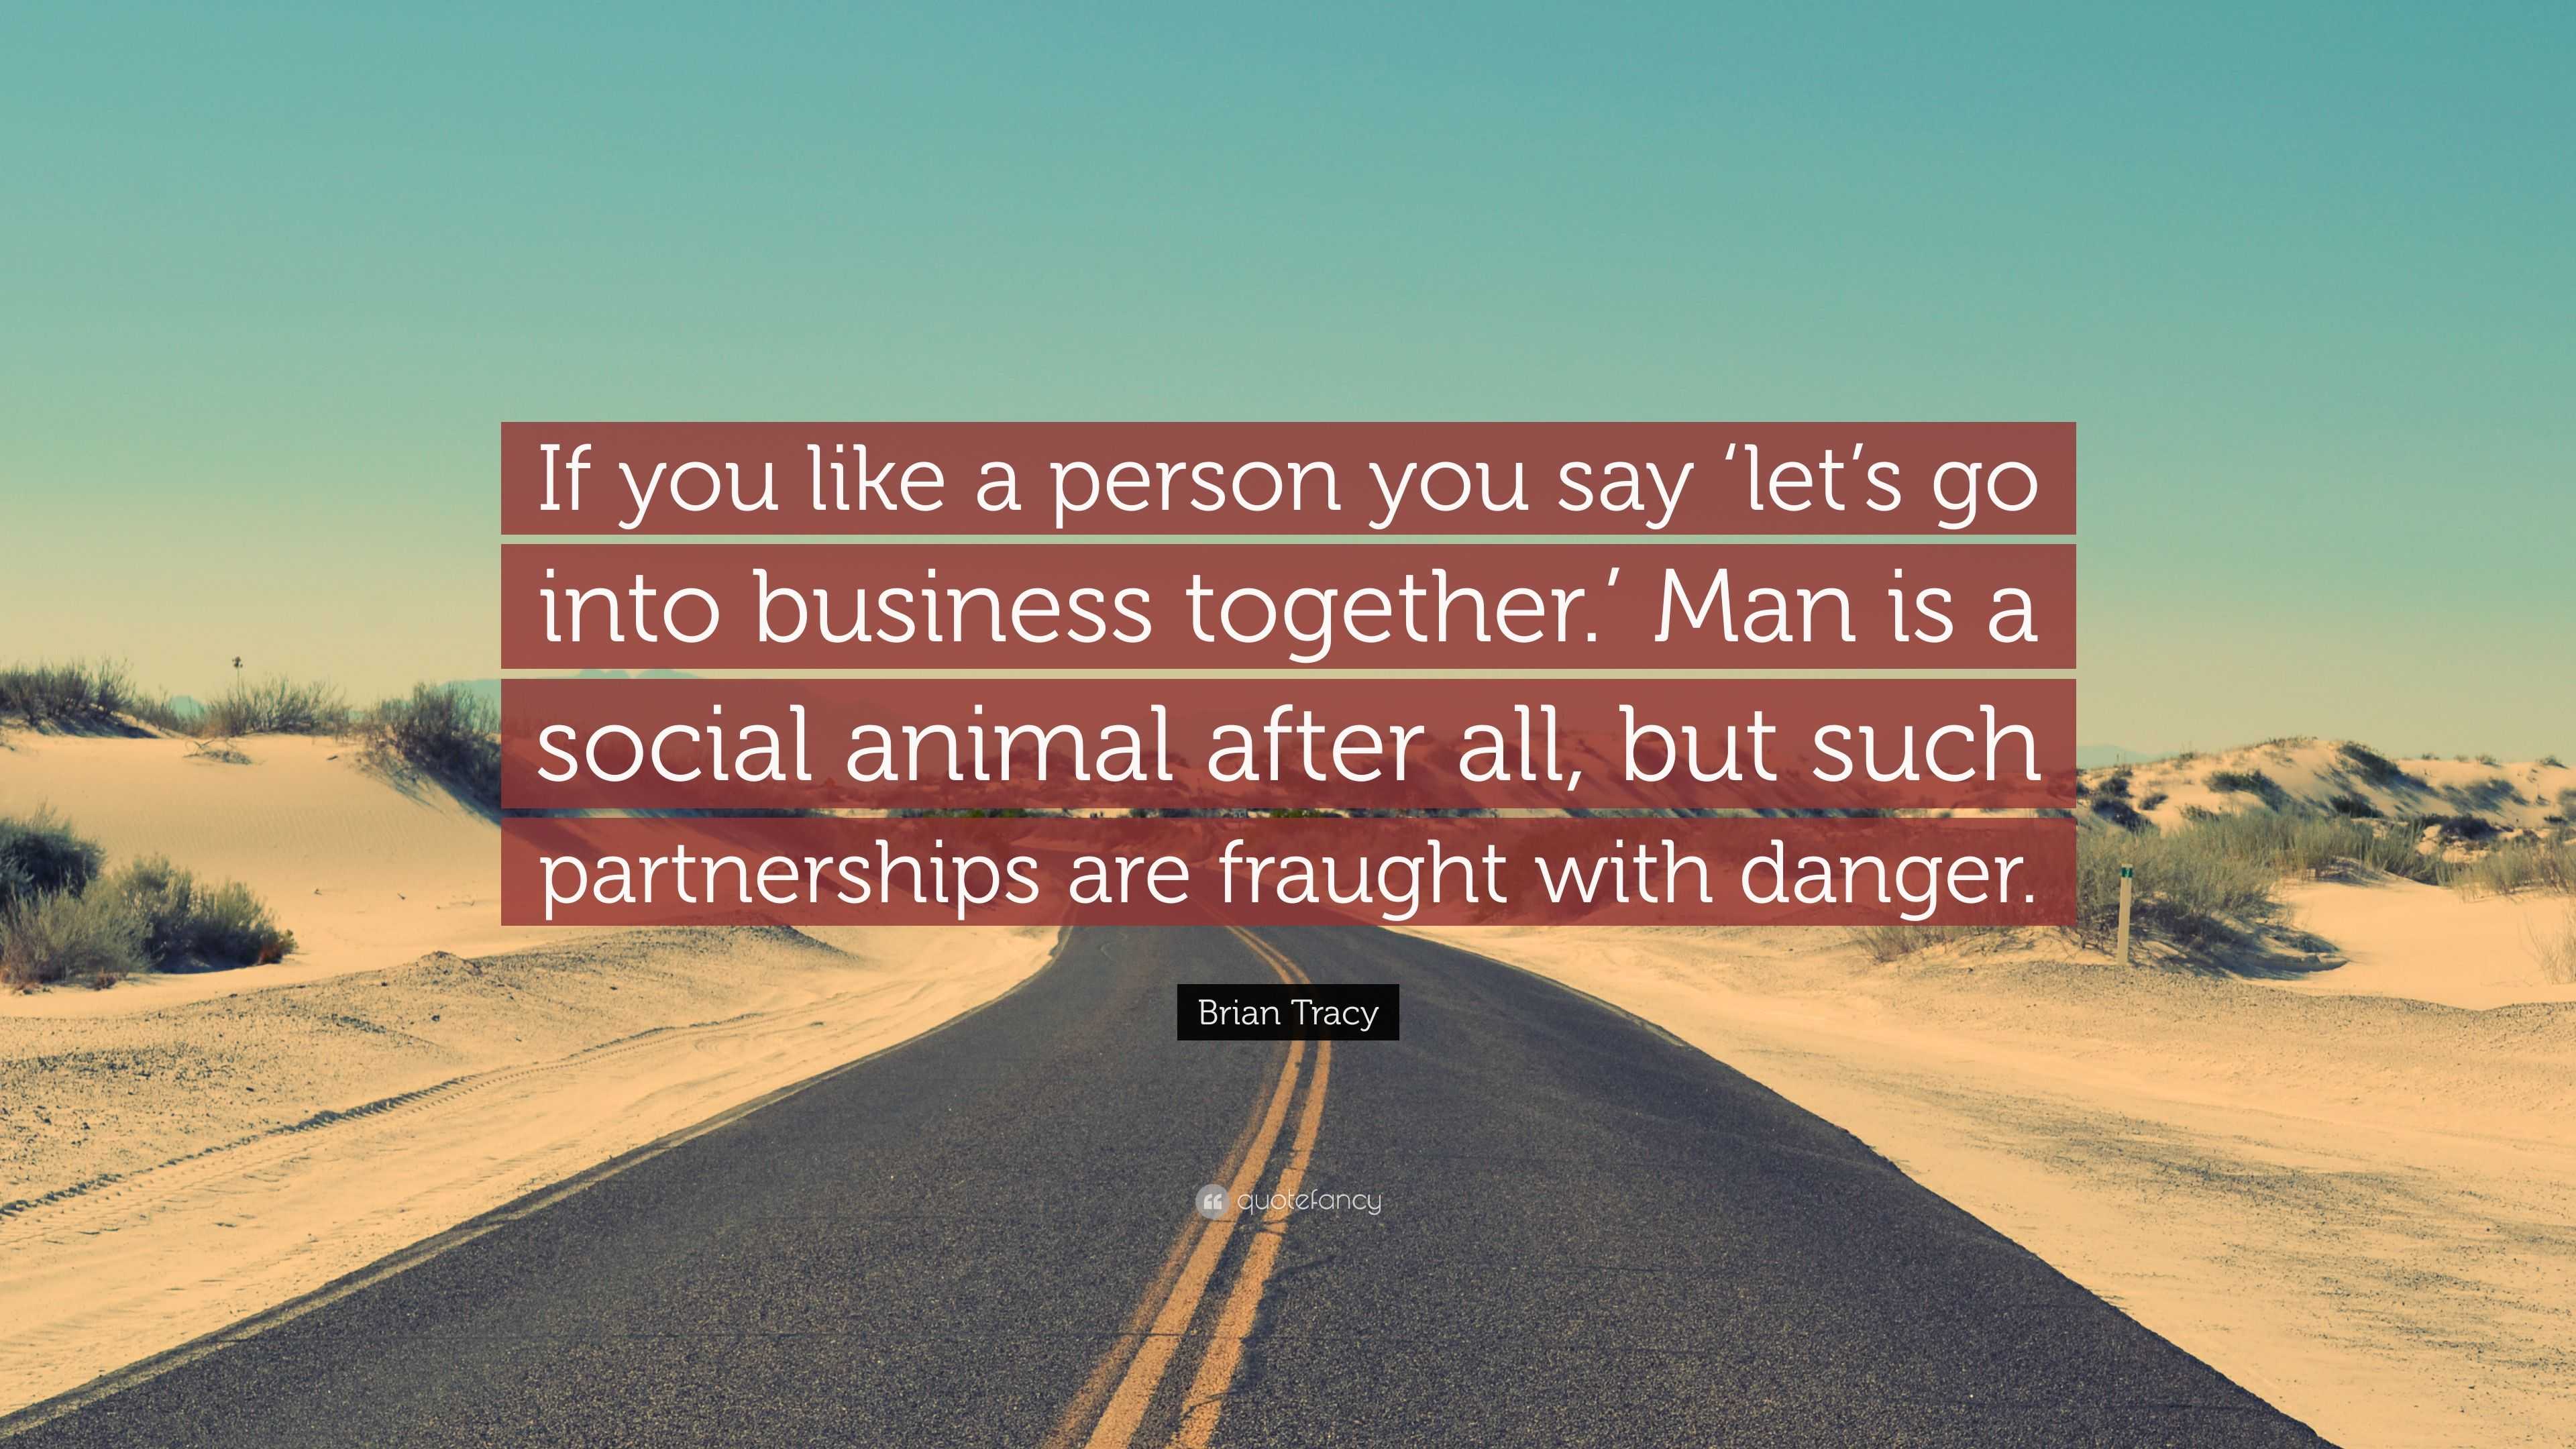 Brian Tracy Quote: “If you like a person you say 'let's go into business  together.' Man is a social animal after all, but such partnerships ...”